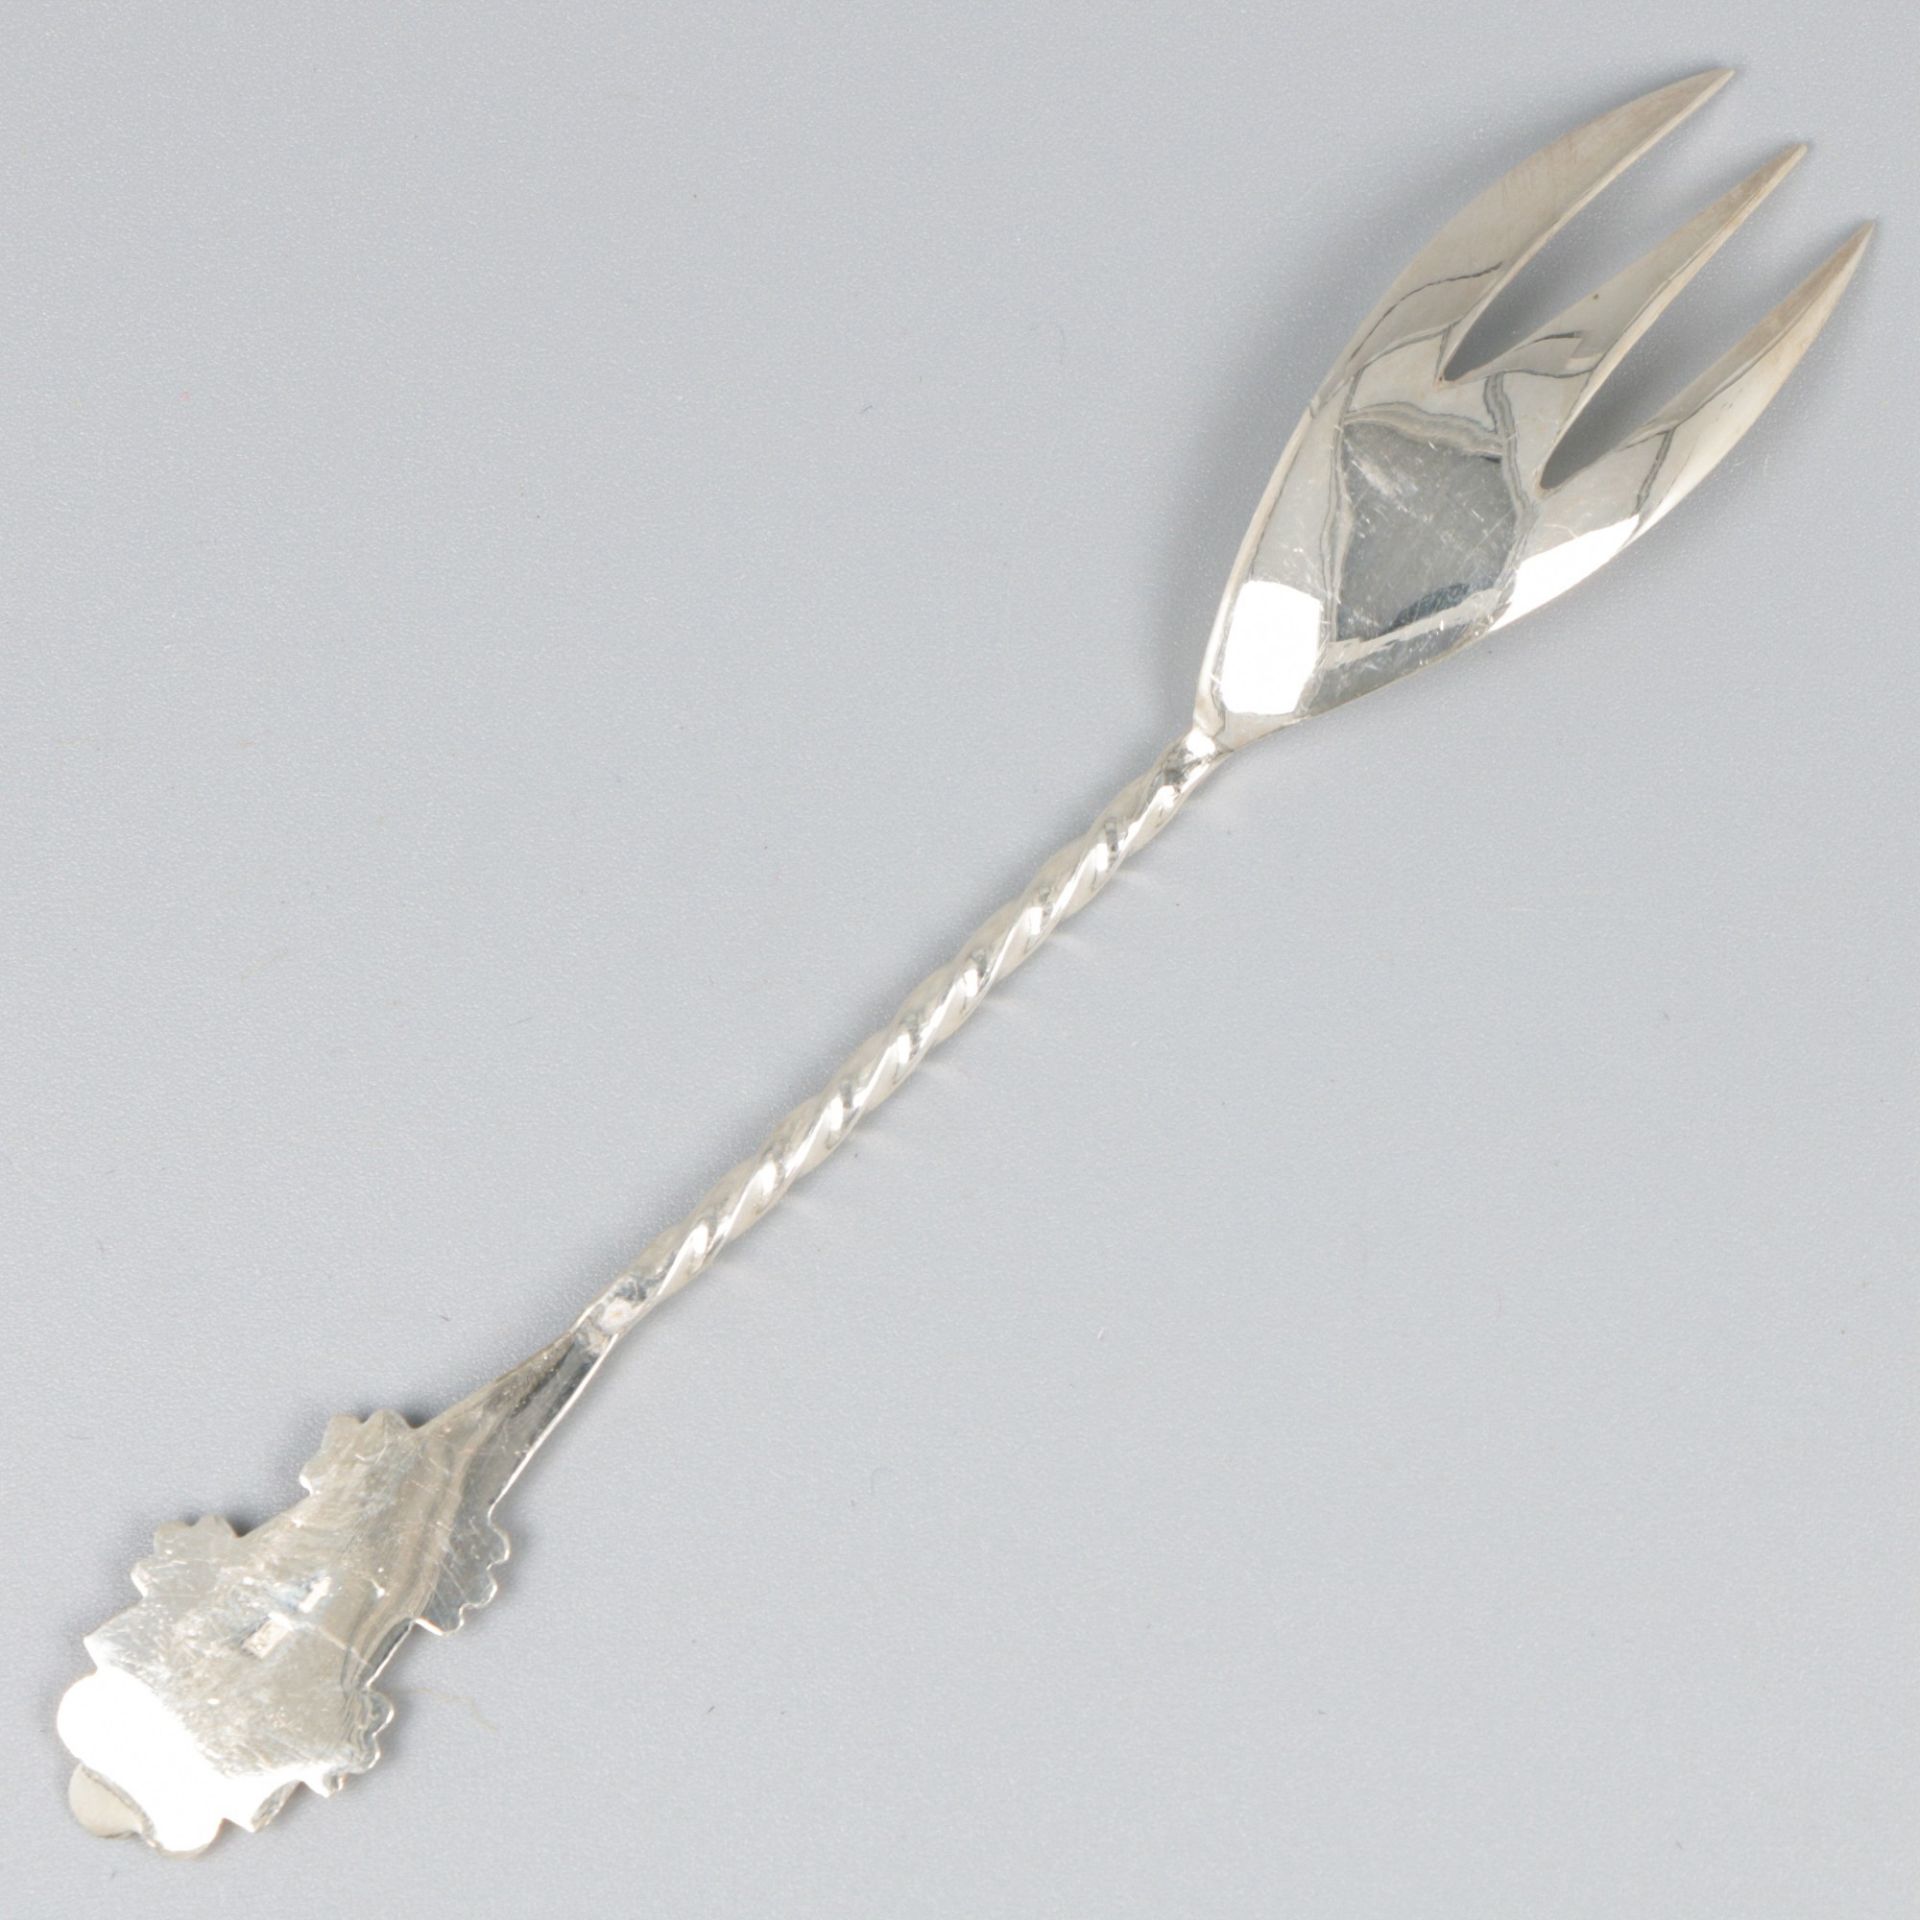 6-piece set of cake / pastry forks silver. - Image 8 of 9